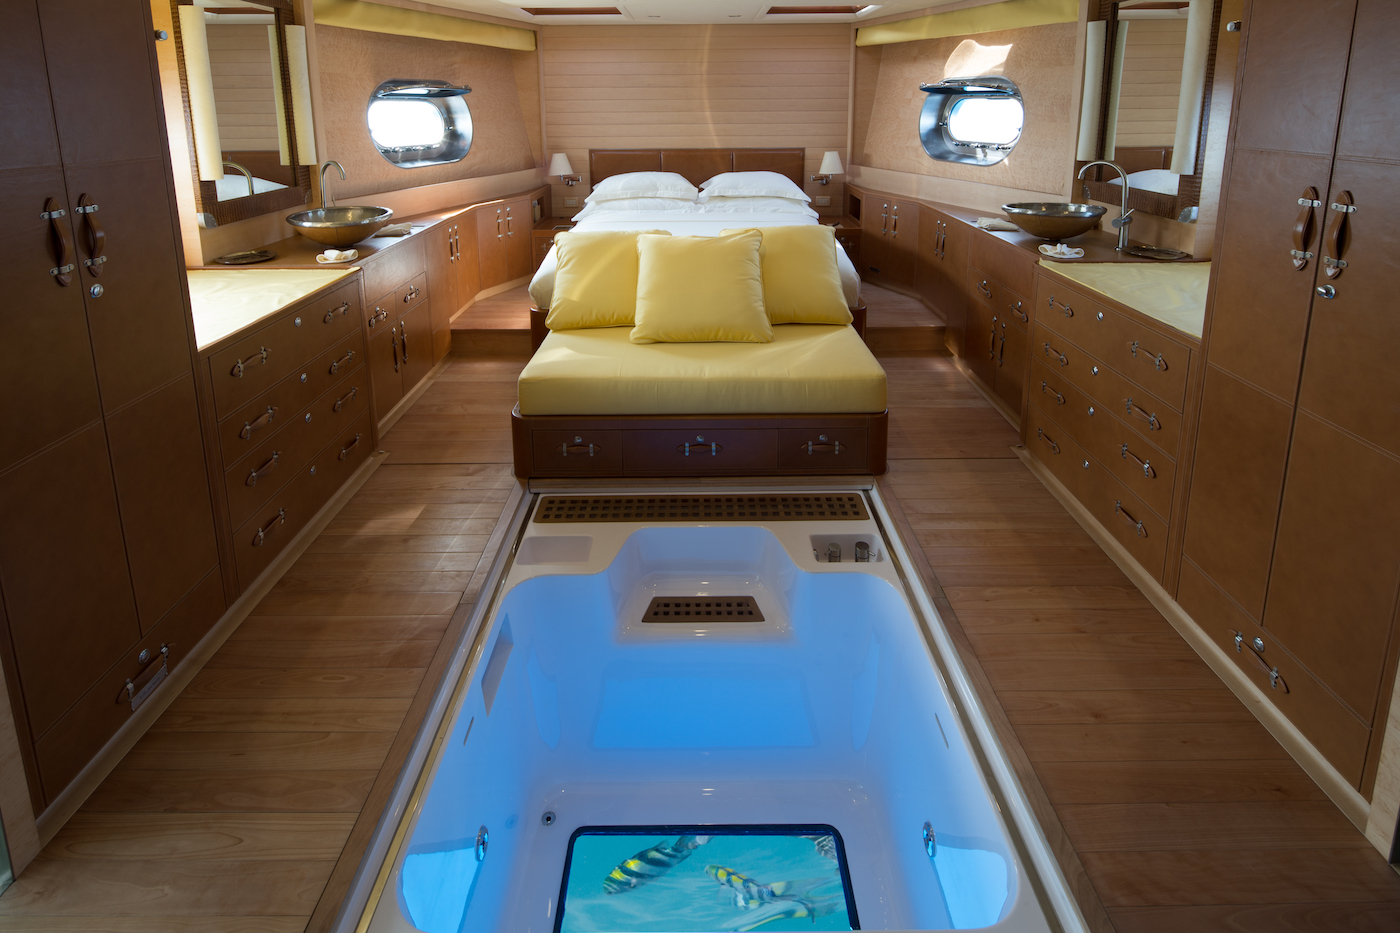 SIA Master Cabin With Glass Bottom Jacuzzi